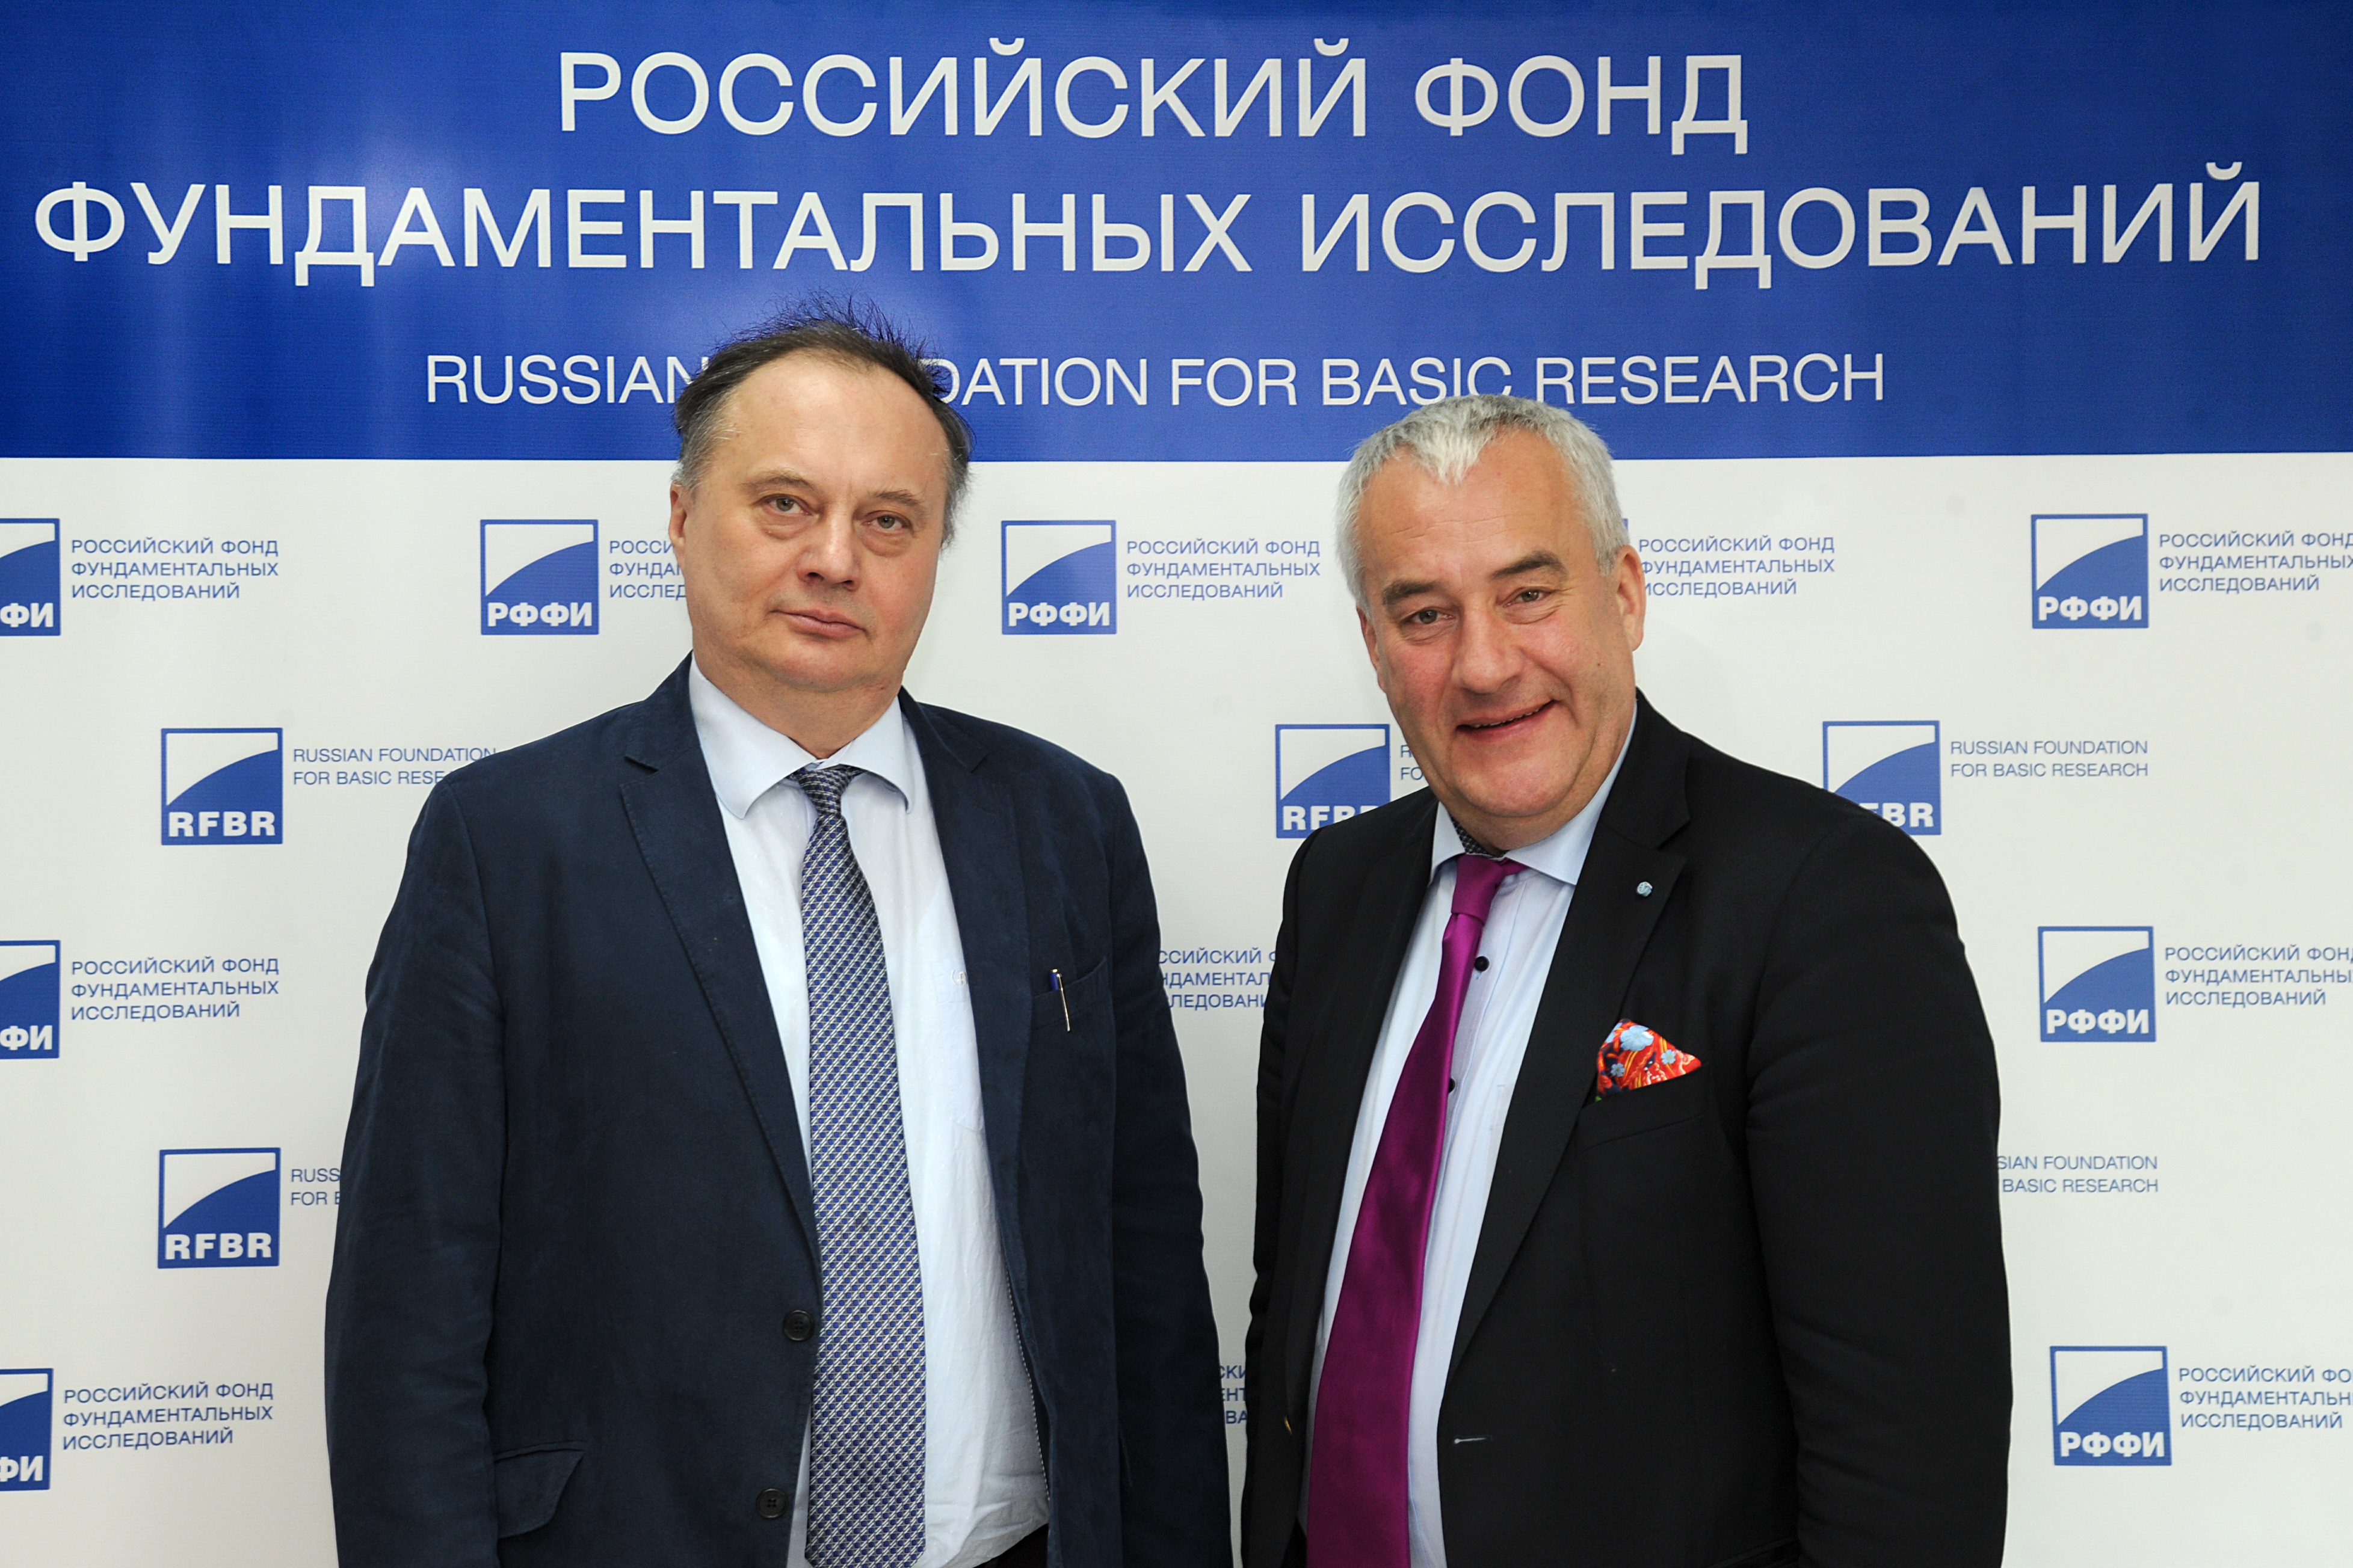 Minister of State Dr. Ludwig Spaenle and Deputy Chair of RFBR Council Vladimir Kvardakov